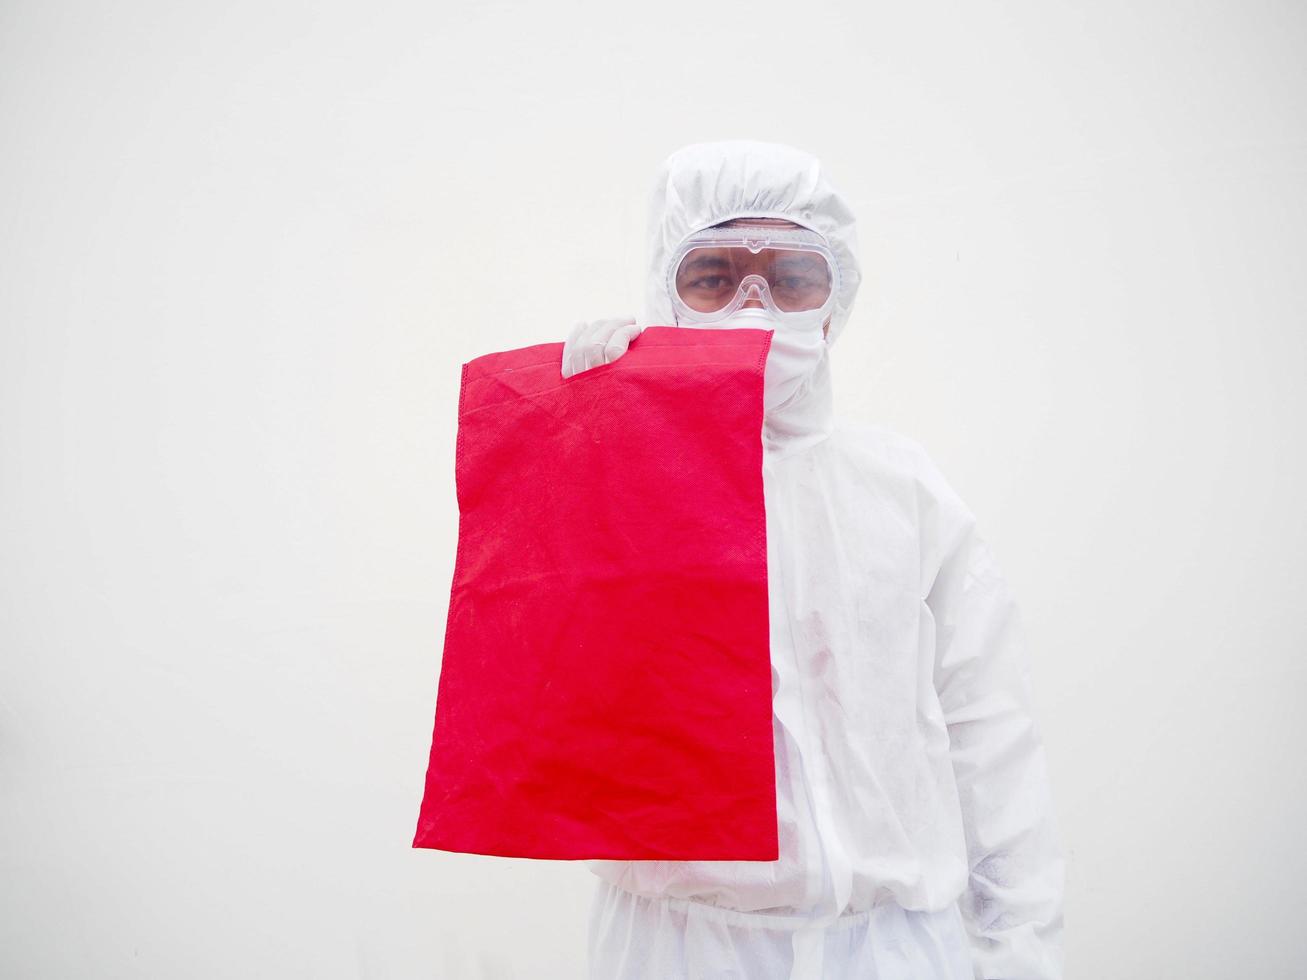 Asian doctor or scientist in PPE suite uniform. holding bag canvas fabric for mockup or for your design. coronavirus or COVID-19 concept isolated white background photo